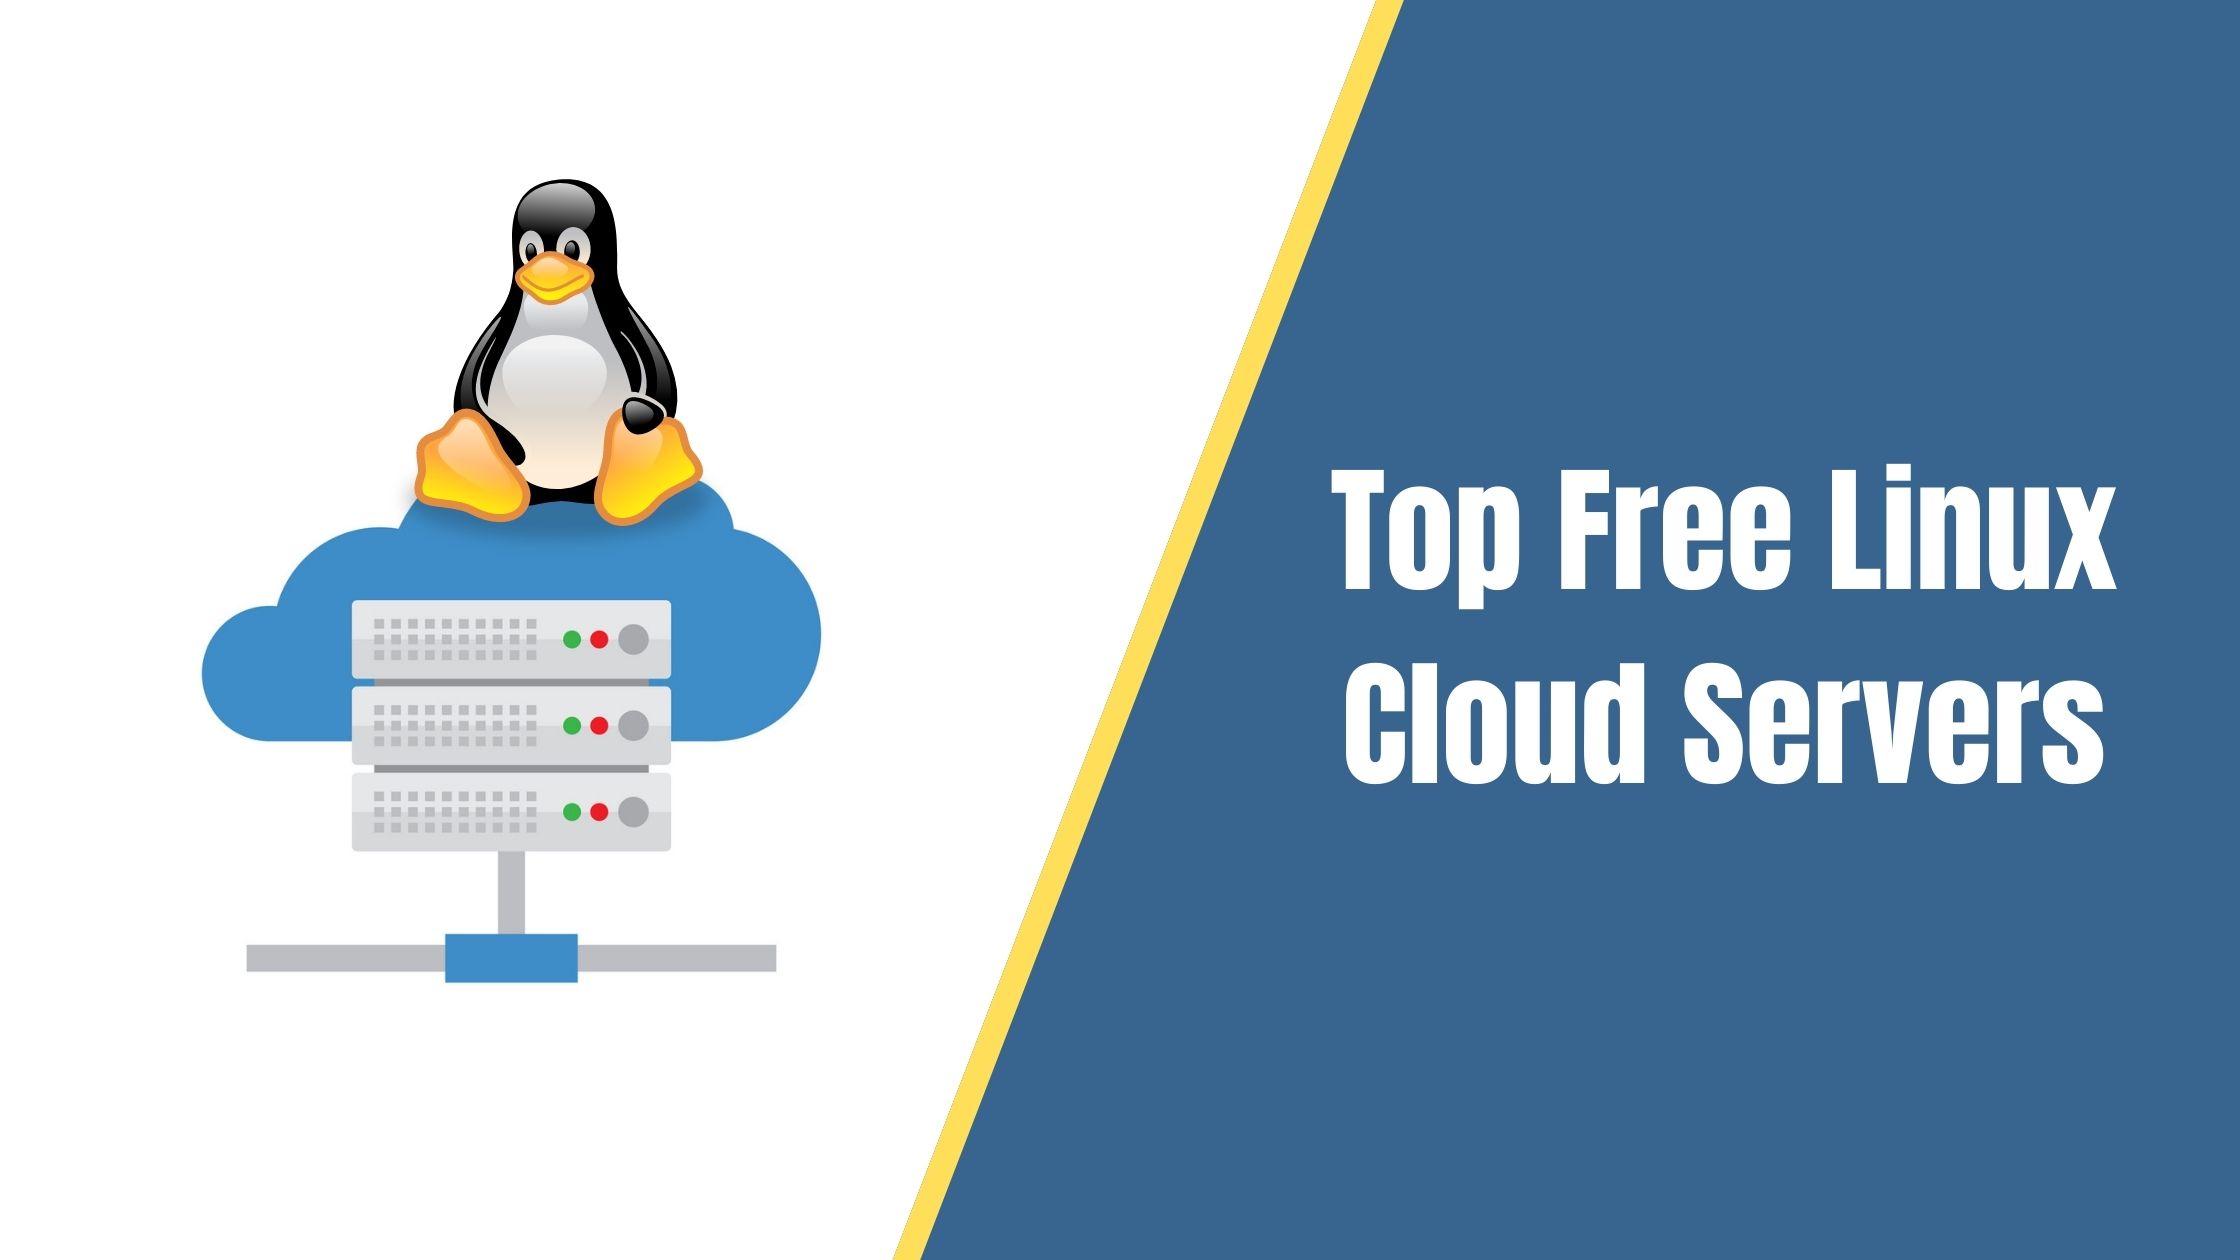 Top Free Linux Cloud Servers To Host Your Web Applications